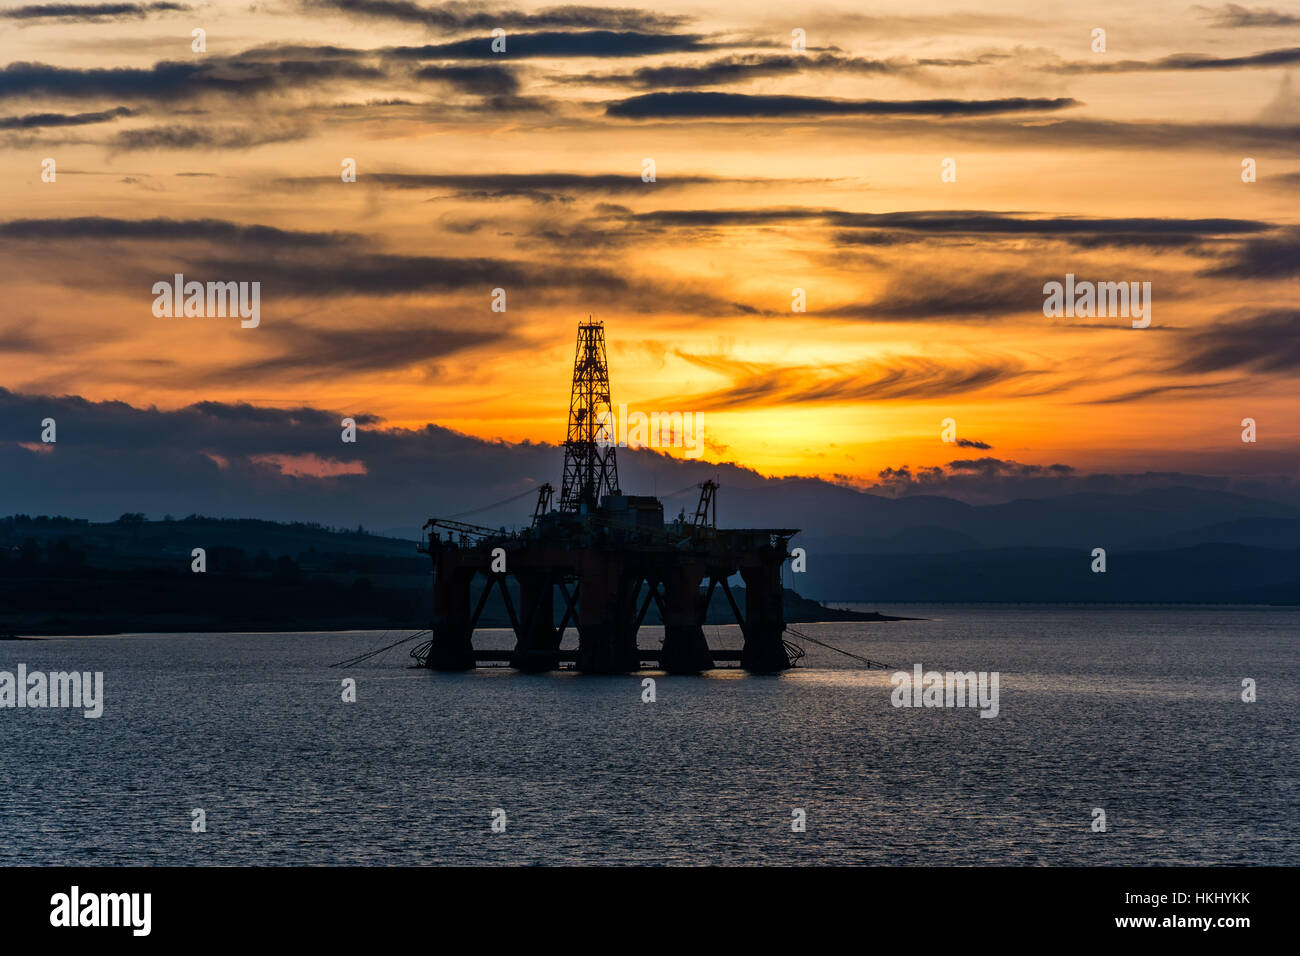 Oil Rigs in the Cromarty Firth, Ross Shire, Scotland, United Kingdom Stock Photo